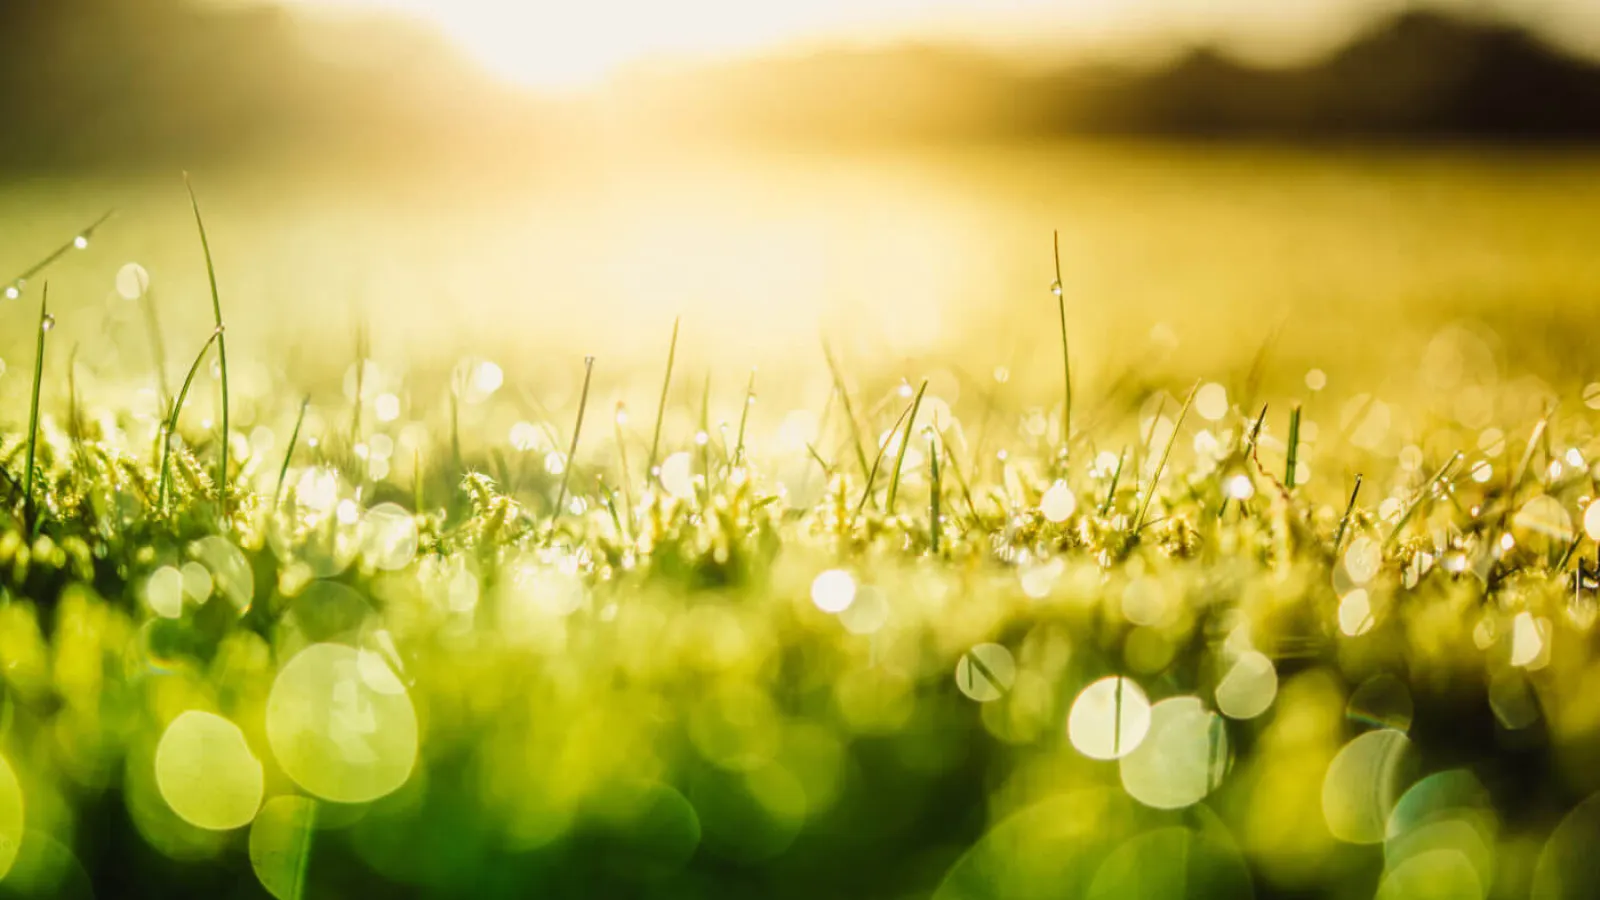 a field of grass with dew drops